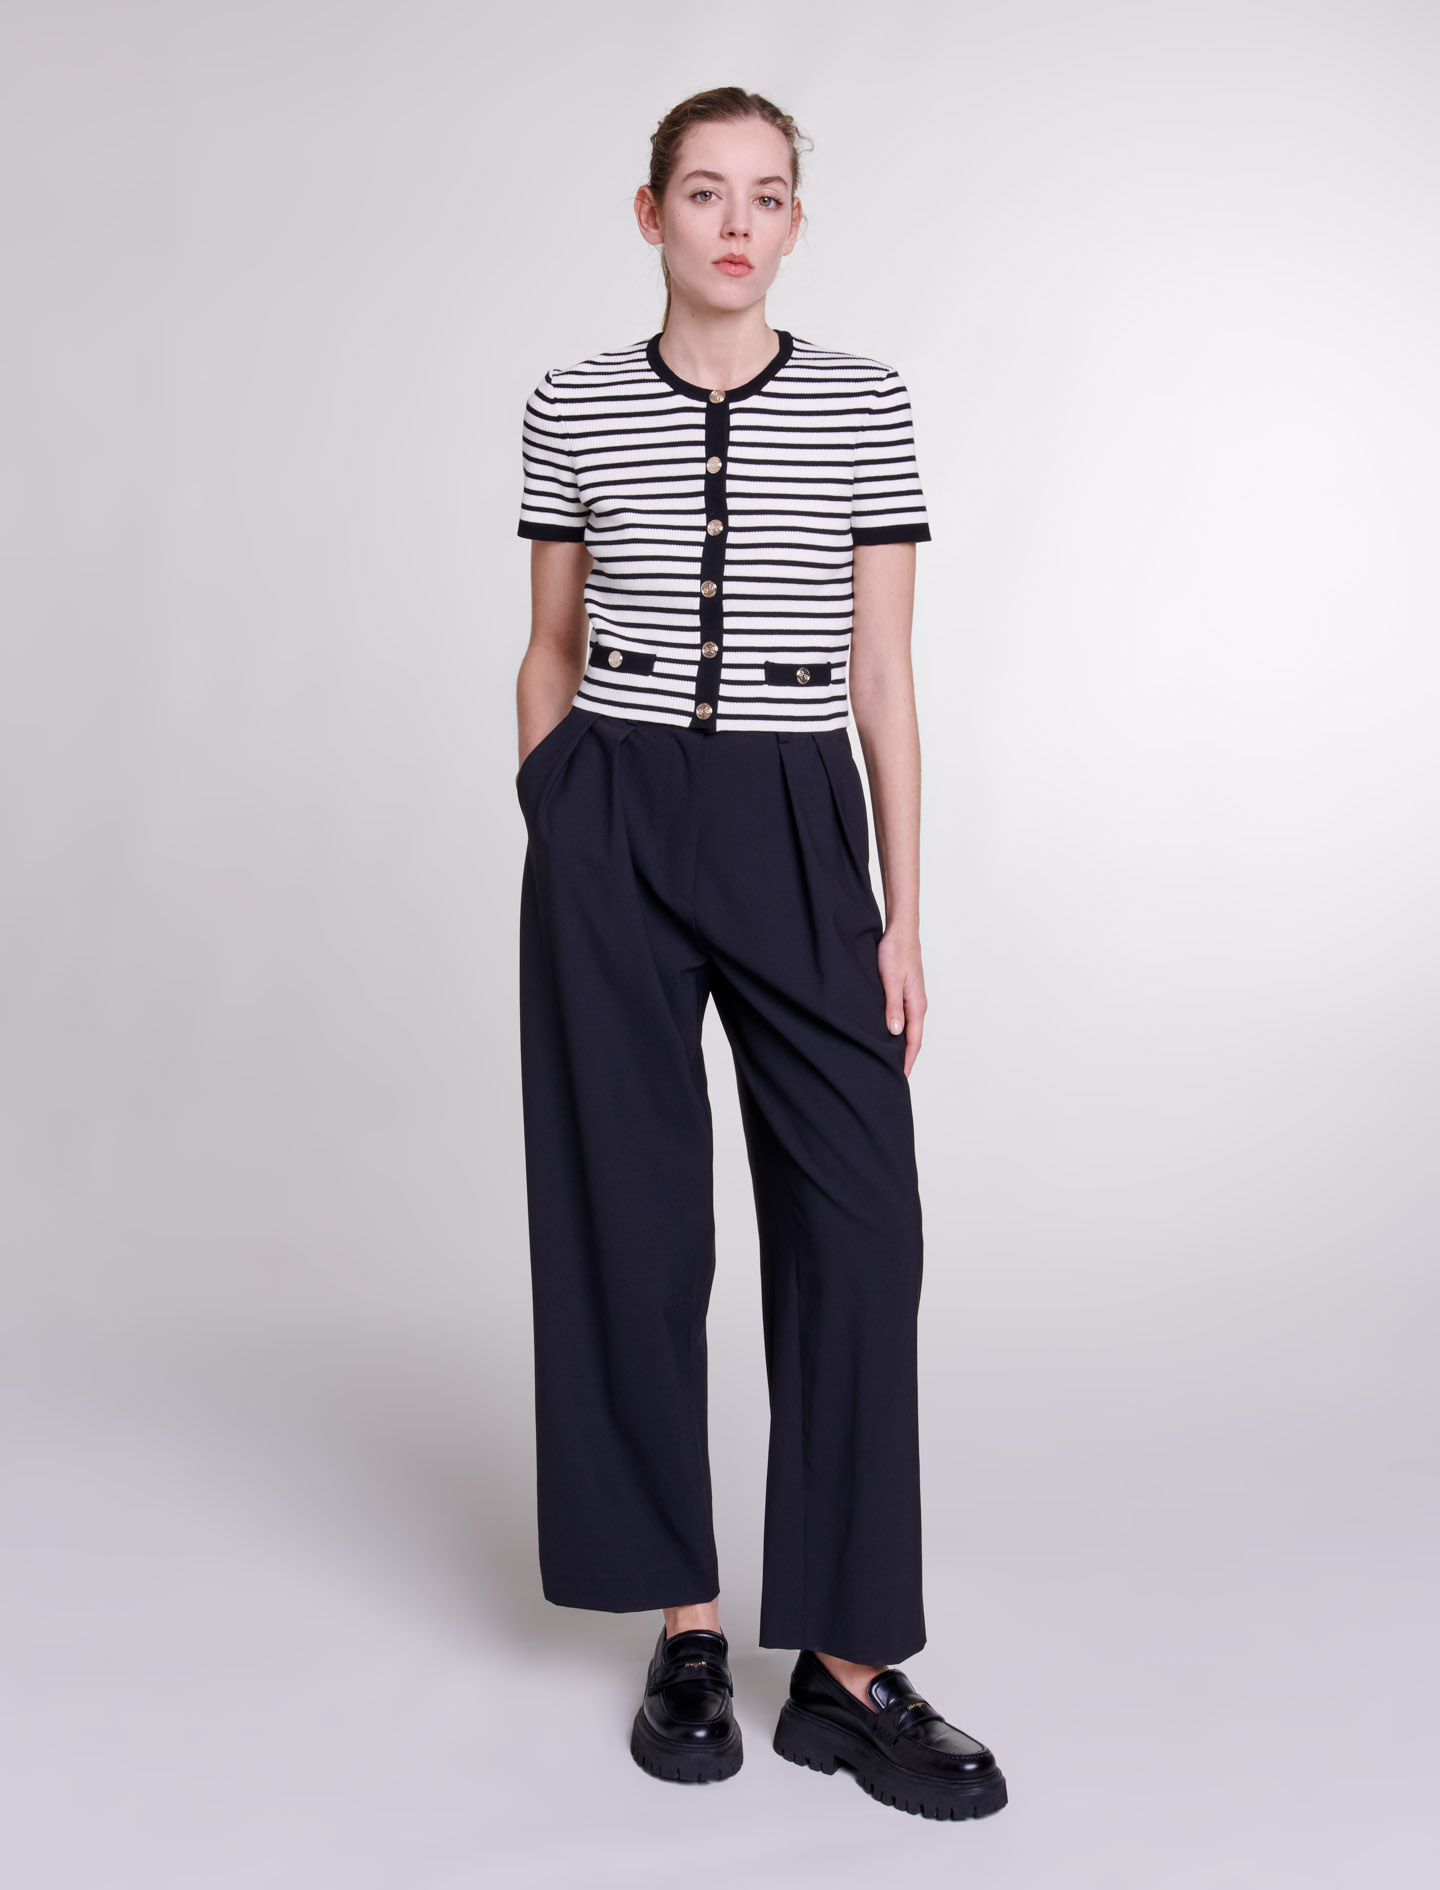 Mixte's polyester, Wide-leg trousers with belt for Spring/Summer, size Mixte-Pants & Jeans-US XL / FR 41, in color Black / Black